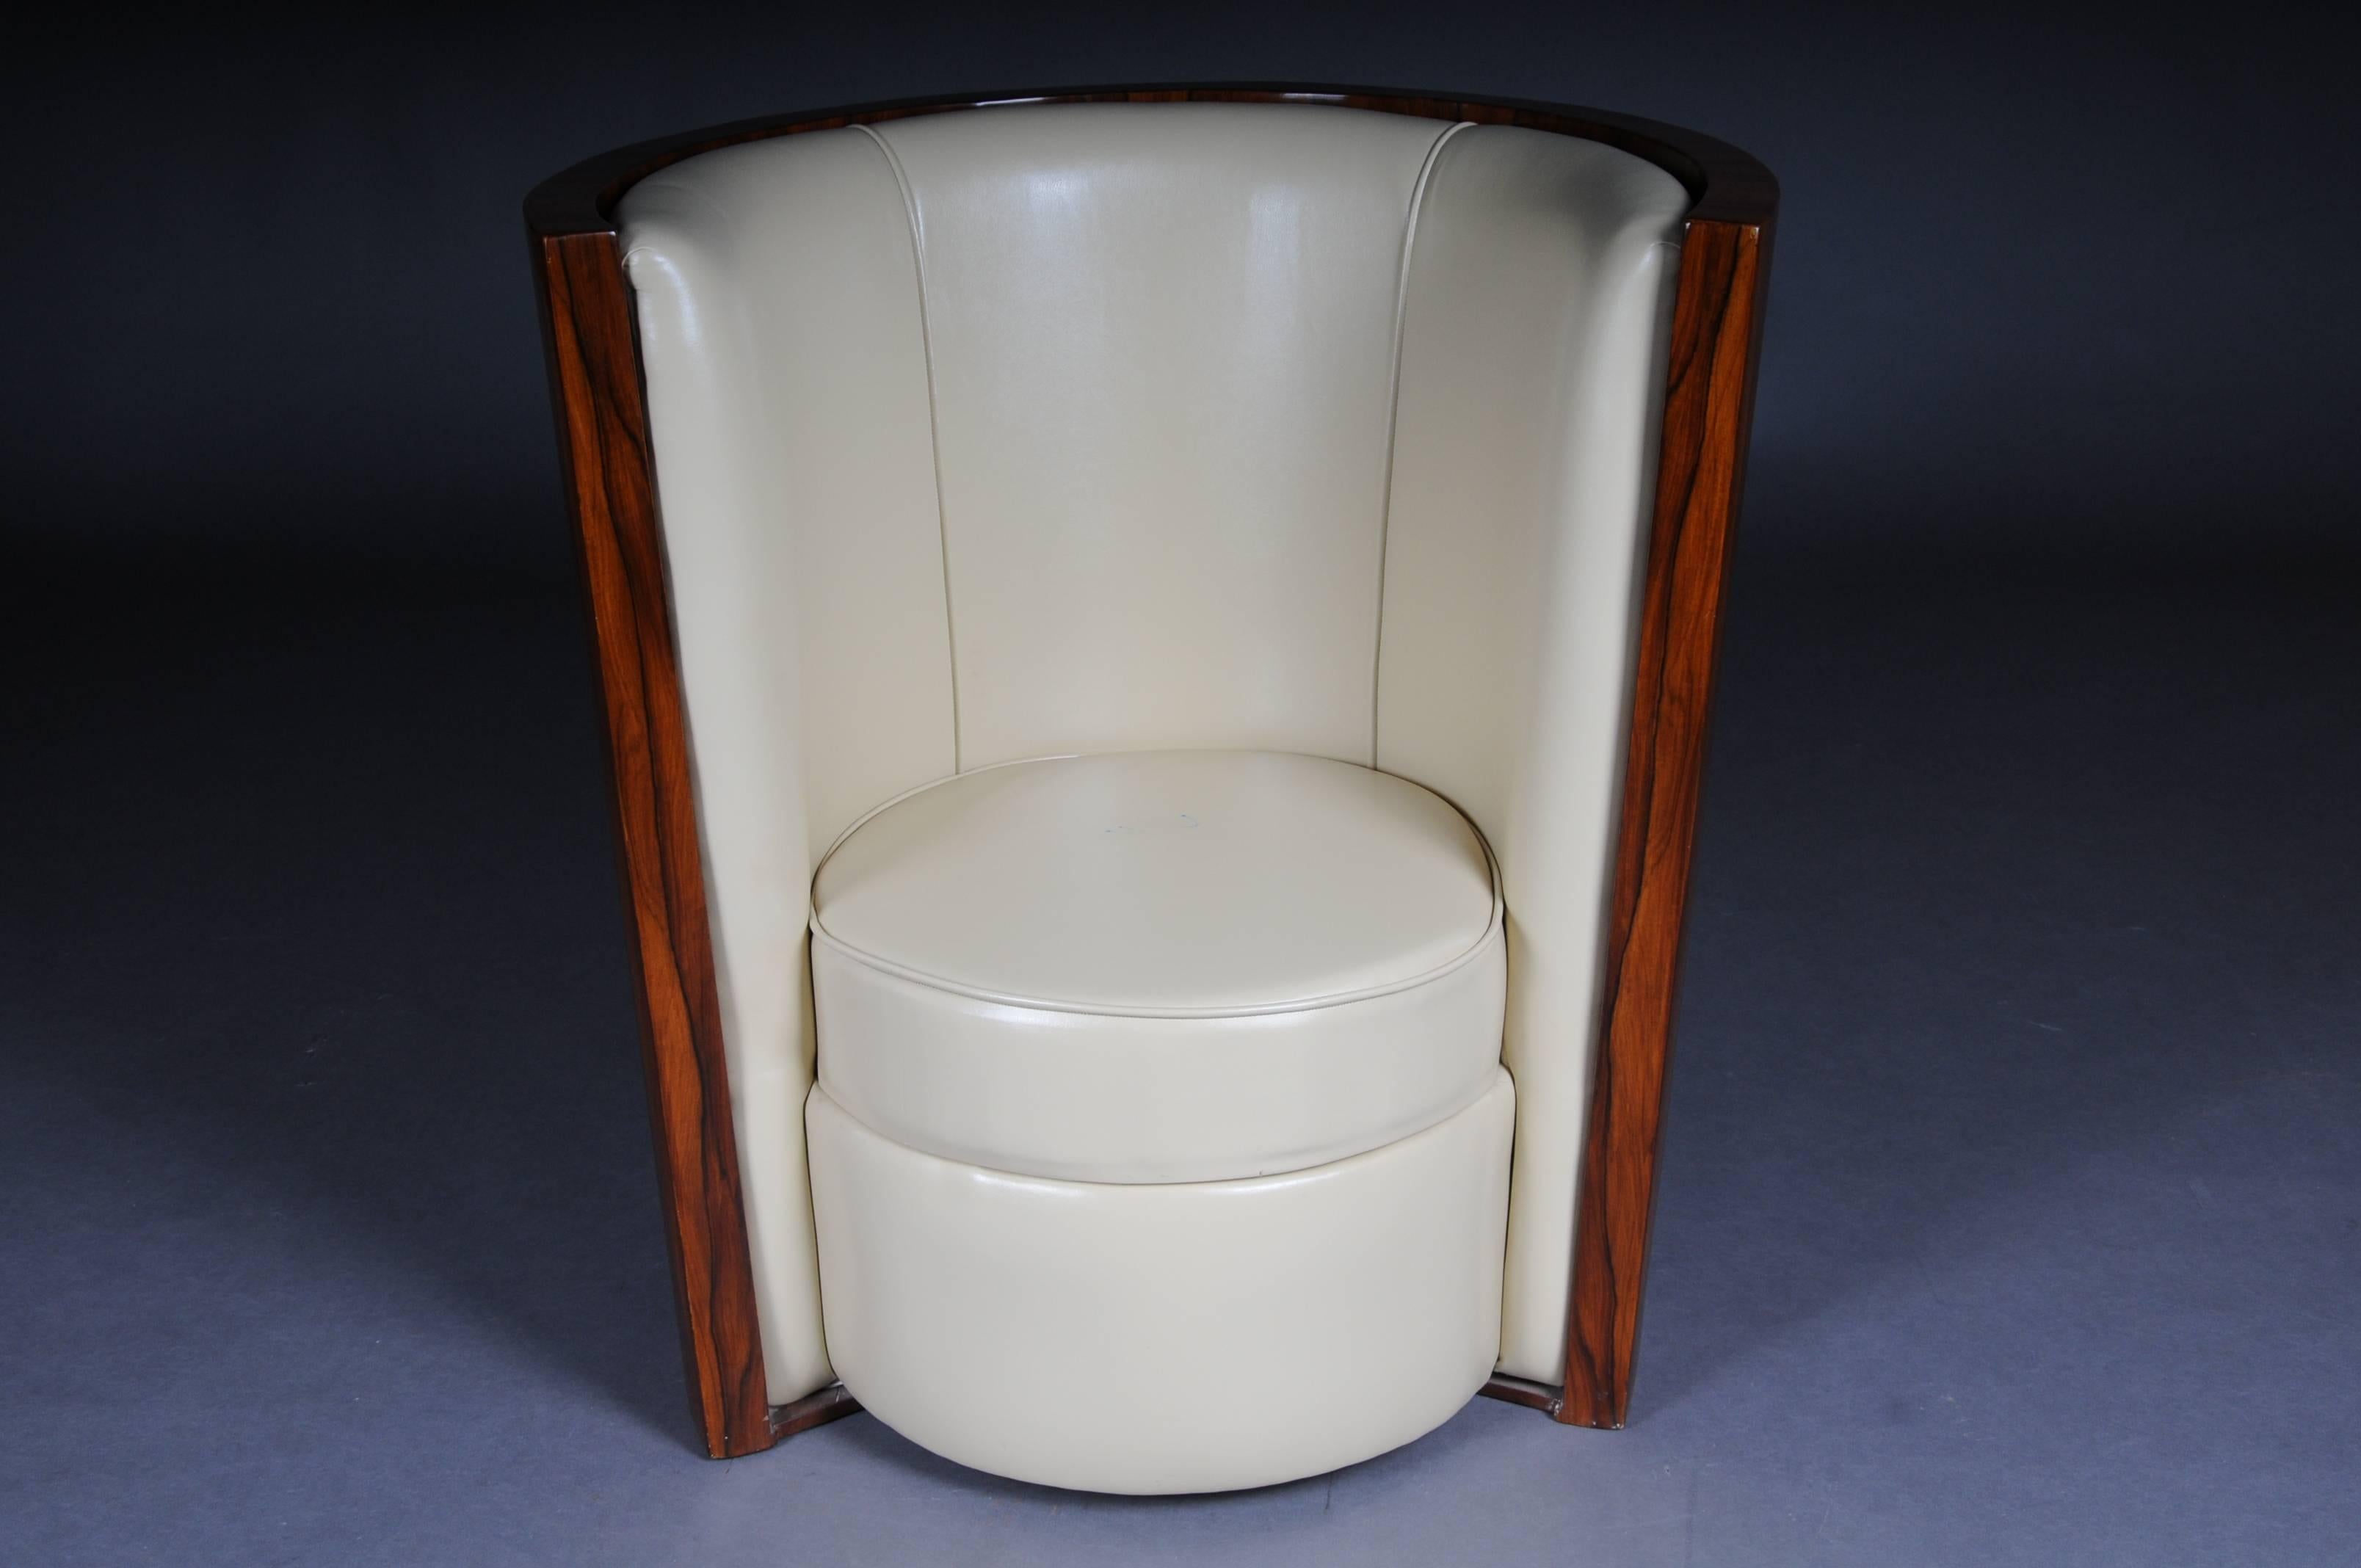 Exotic rosewood on solid conifers. Conical shaped body with high closed backrest. Externally decorated with a decorative grained veneer. The backrest and seat are upholstered with a creamy white leather imitation. High quality original Classic